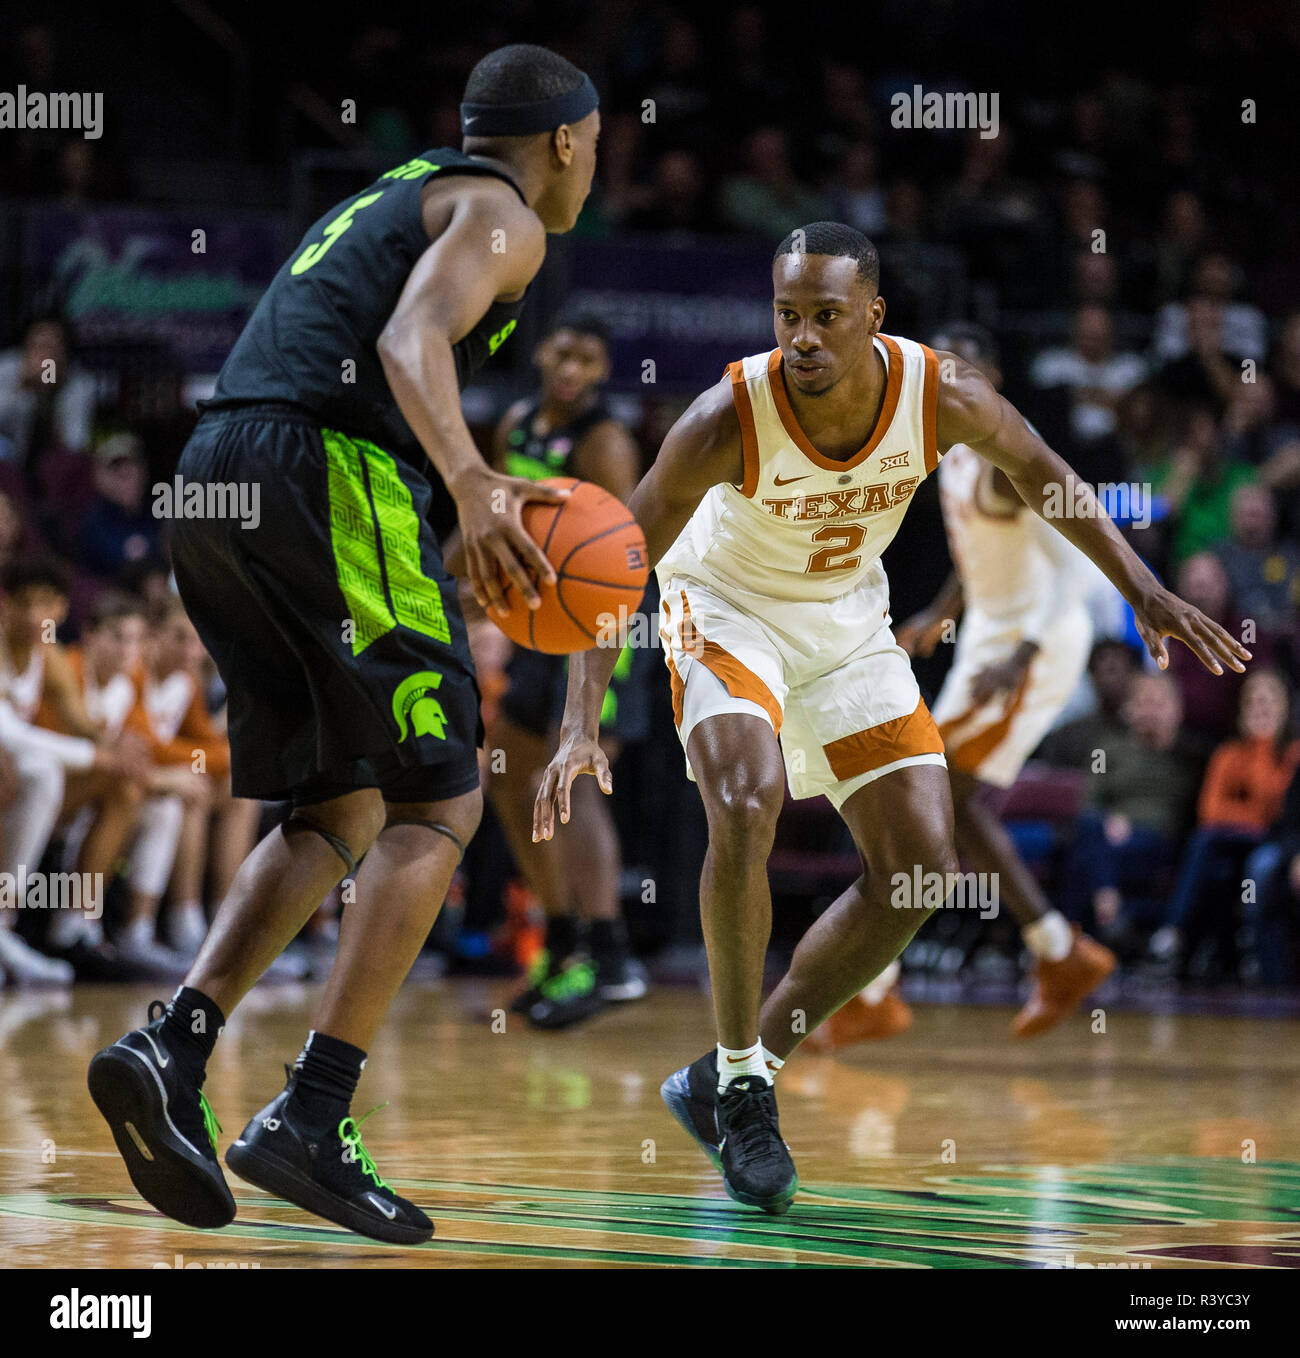 Nov 23 2018 Las Vegas, NV U.S.A. Texas Longhorns guard Matt Coleman III (2) brings the ball up court during the NCAA Men's Basketball Continental Tire Las Vegas Invitational between Texas Longhorns and the Michigan State Spartans 68-78 lost at The Orleans Arena Las Vegas, NV. Thurman James/CSM Stock Photo